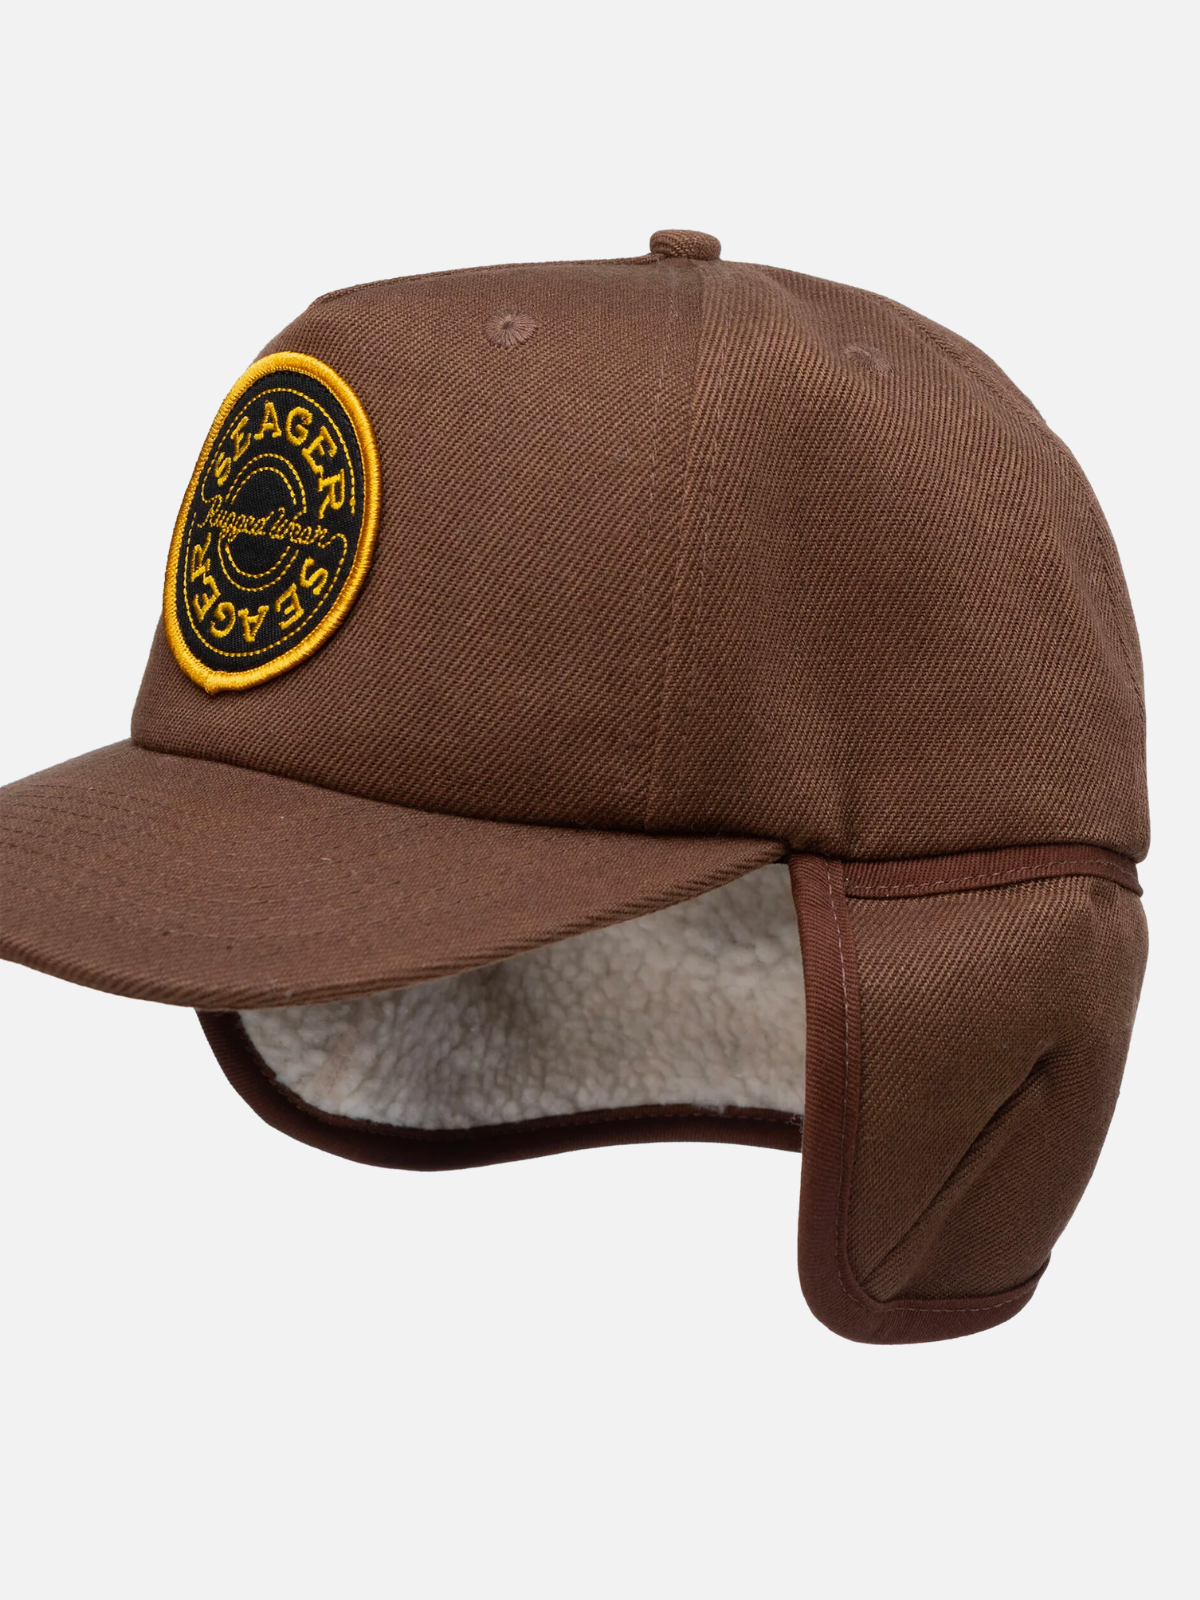 seager caliber cotton flapjack winter sherpa hat cotton canvas brown white gold yellow black brand patch kempt athens ga georgia men's clothing store